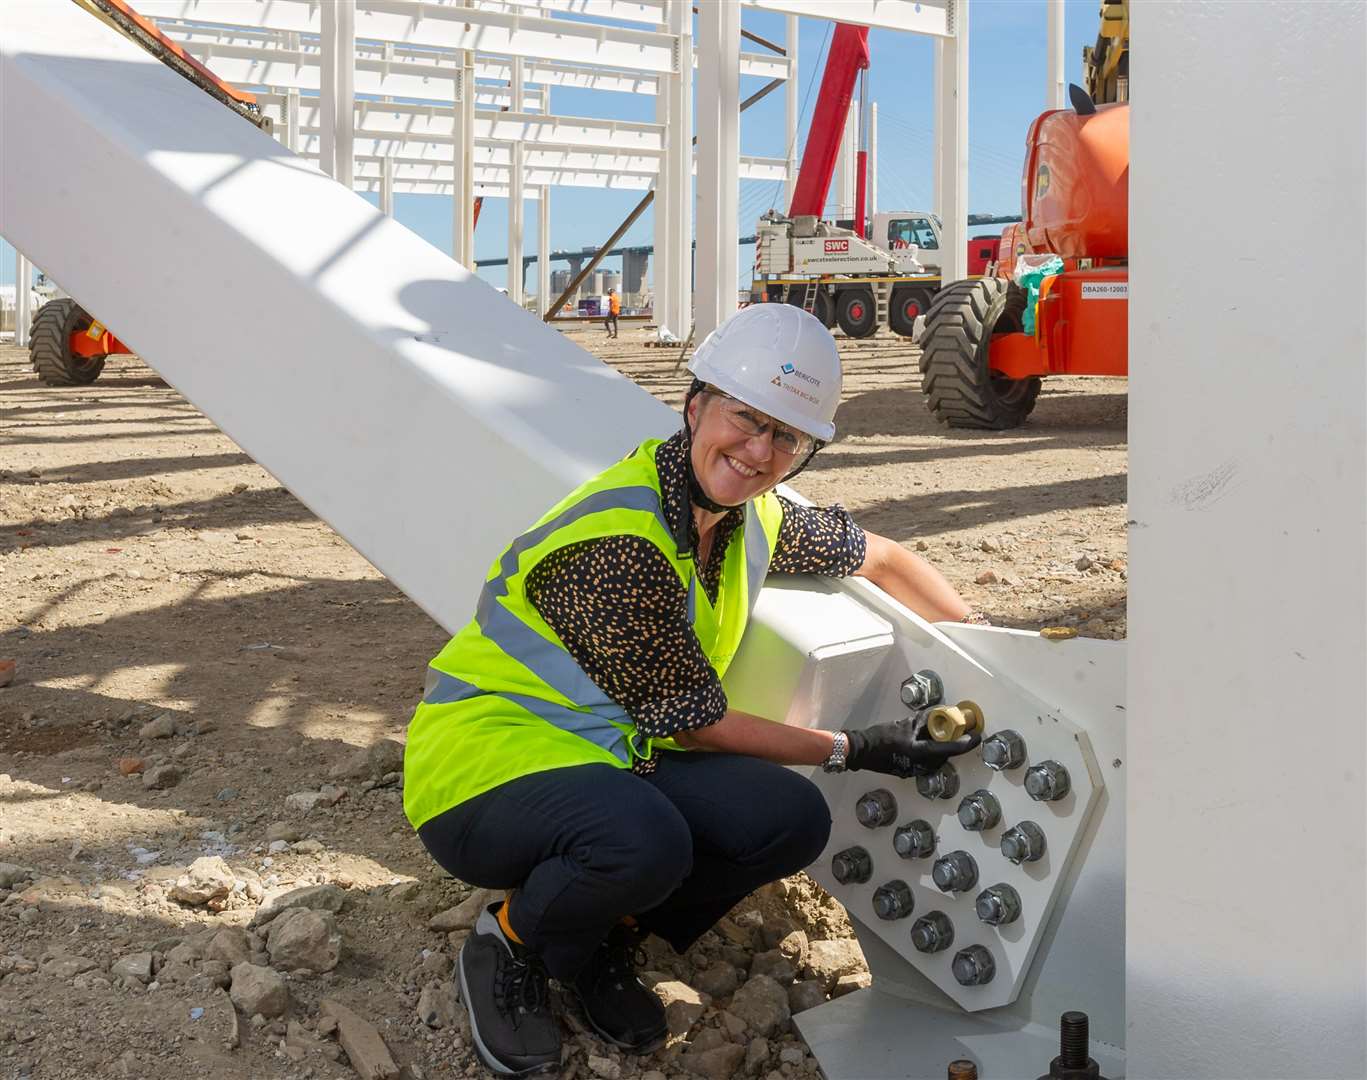 Thames Estuary Envoy Kate Willard marked the construction of the new Dartford distribution centre last year